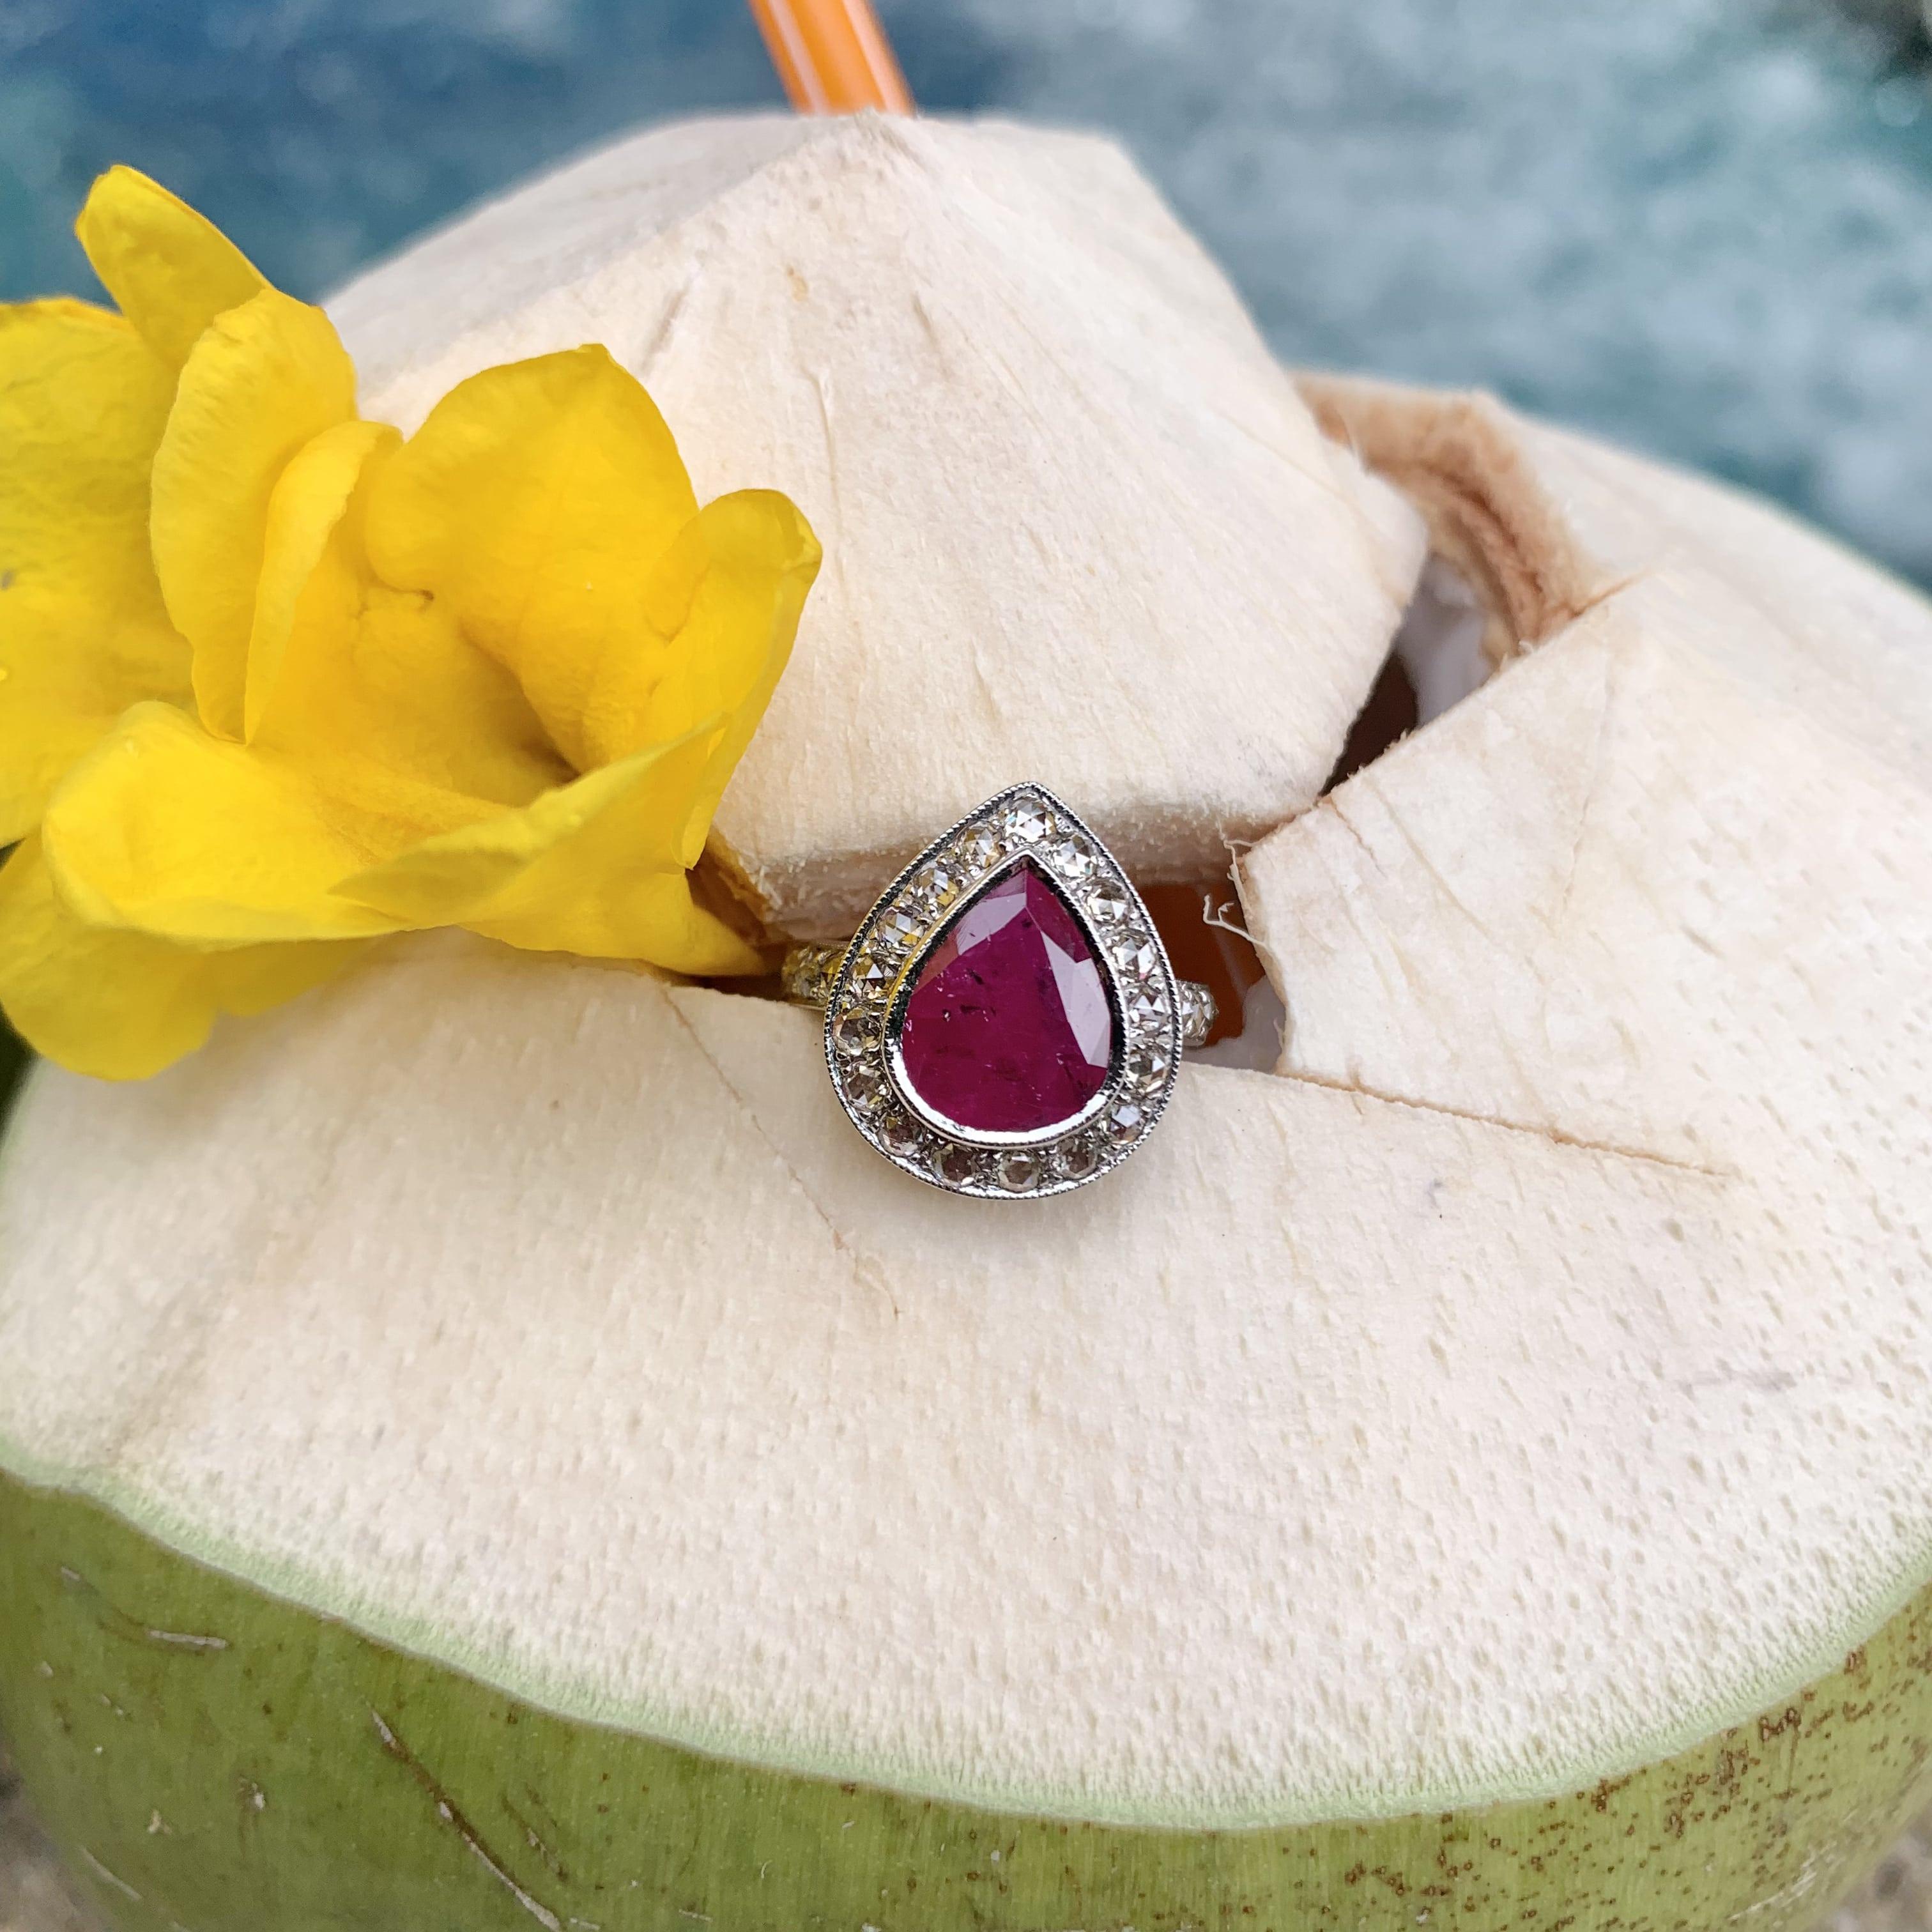 Showcasing a super sensational and an astonishing piece of jewelry, meticulously handcrafted to enchant all connoisseurs of art deco-inspired designs!

This remarkable ring showcases an awe-inspiring 2.80 Carat Ruby as its centerpiece, radiating an